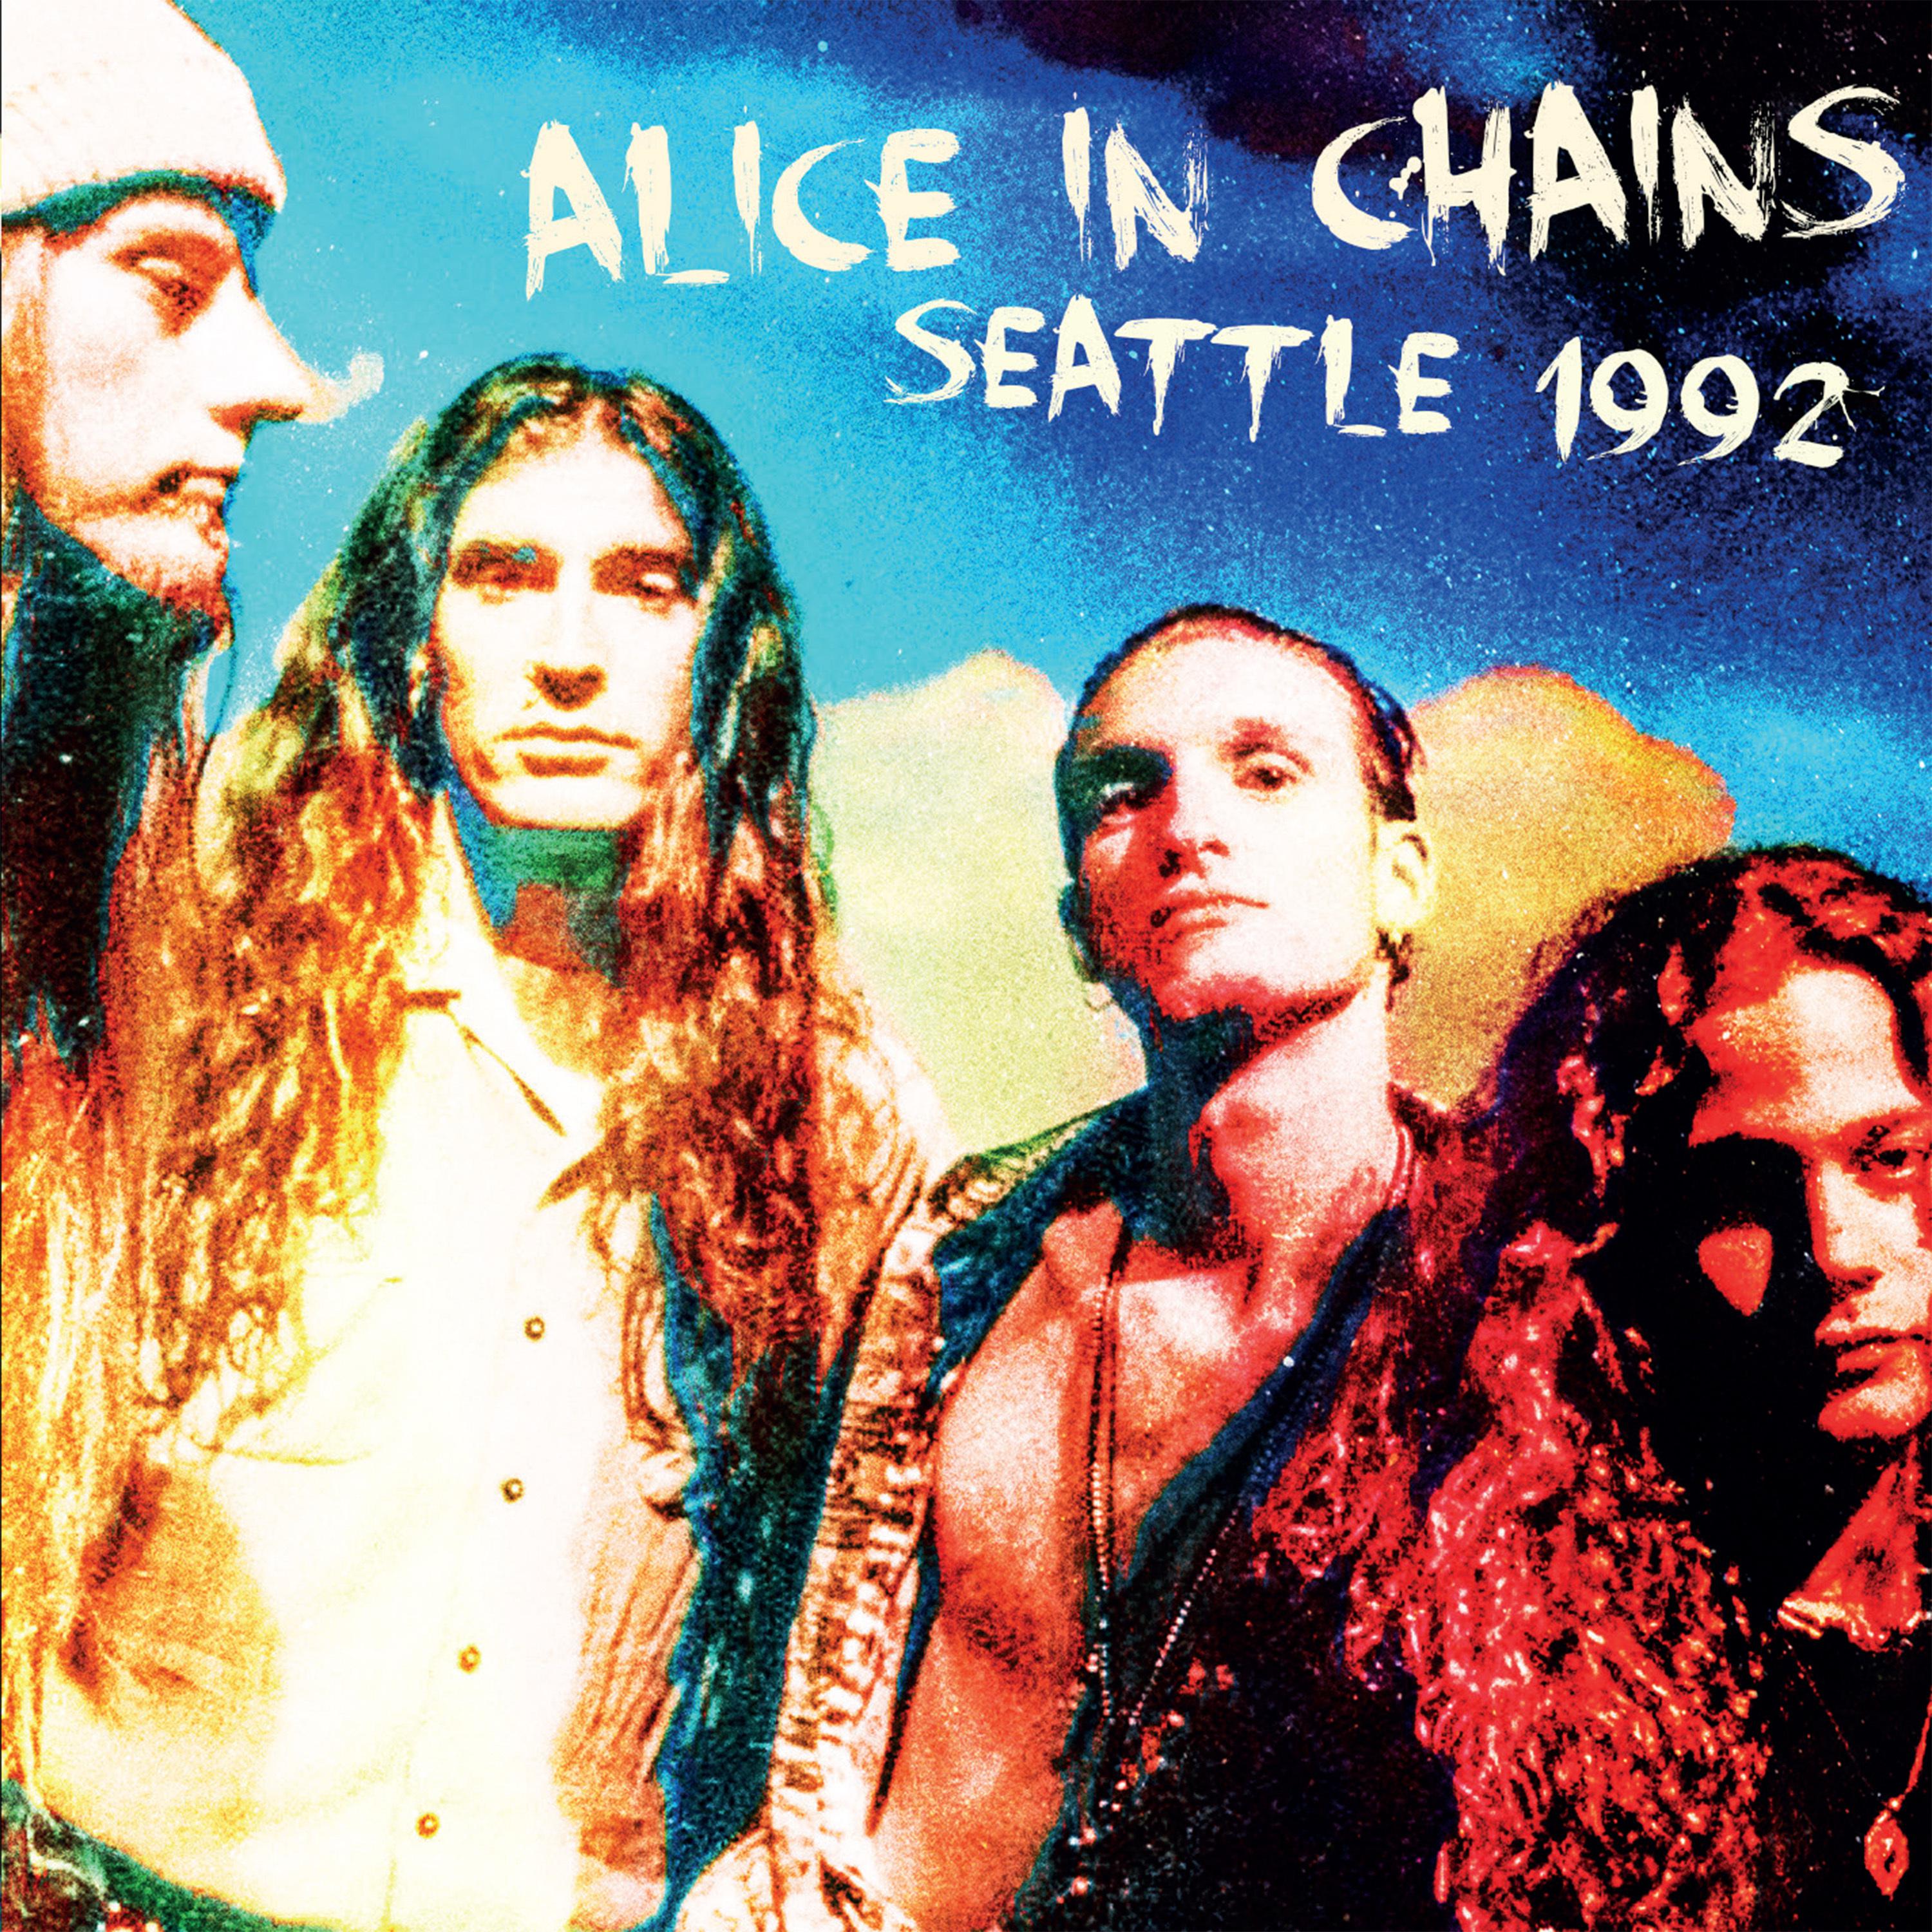 Alice in Chains - God Smack (Live)